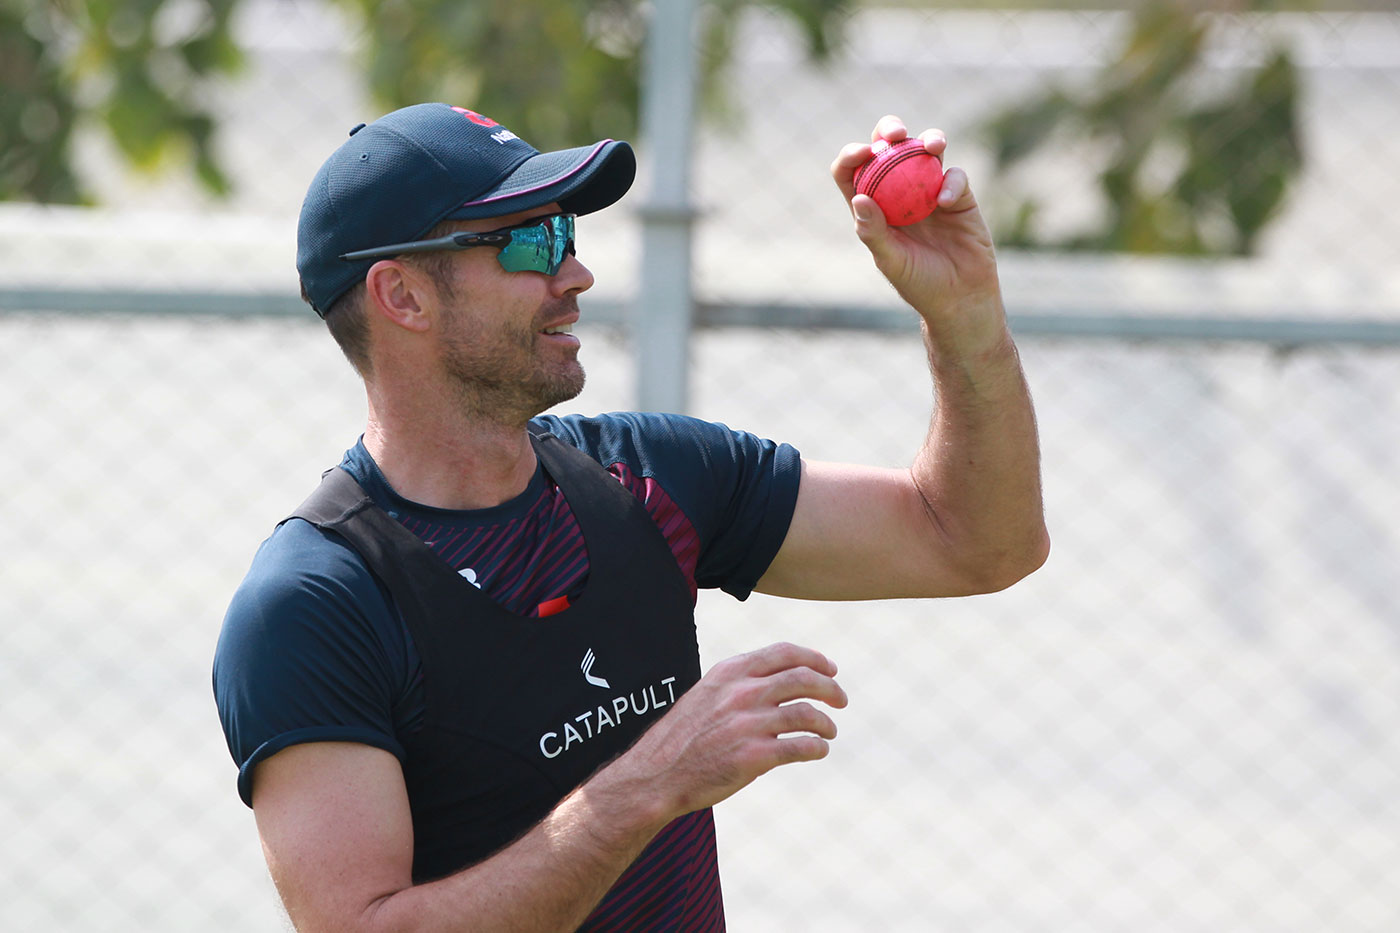 James Anderson practicing with the pink ball ahead of third Test | BCCI